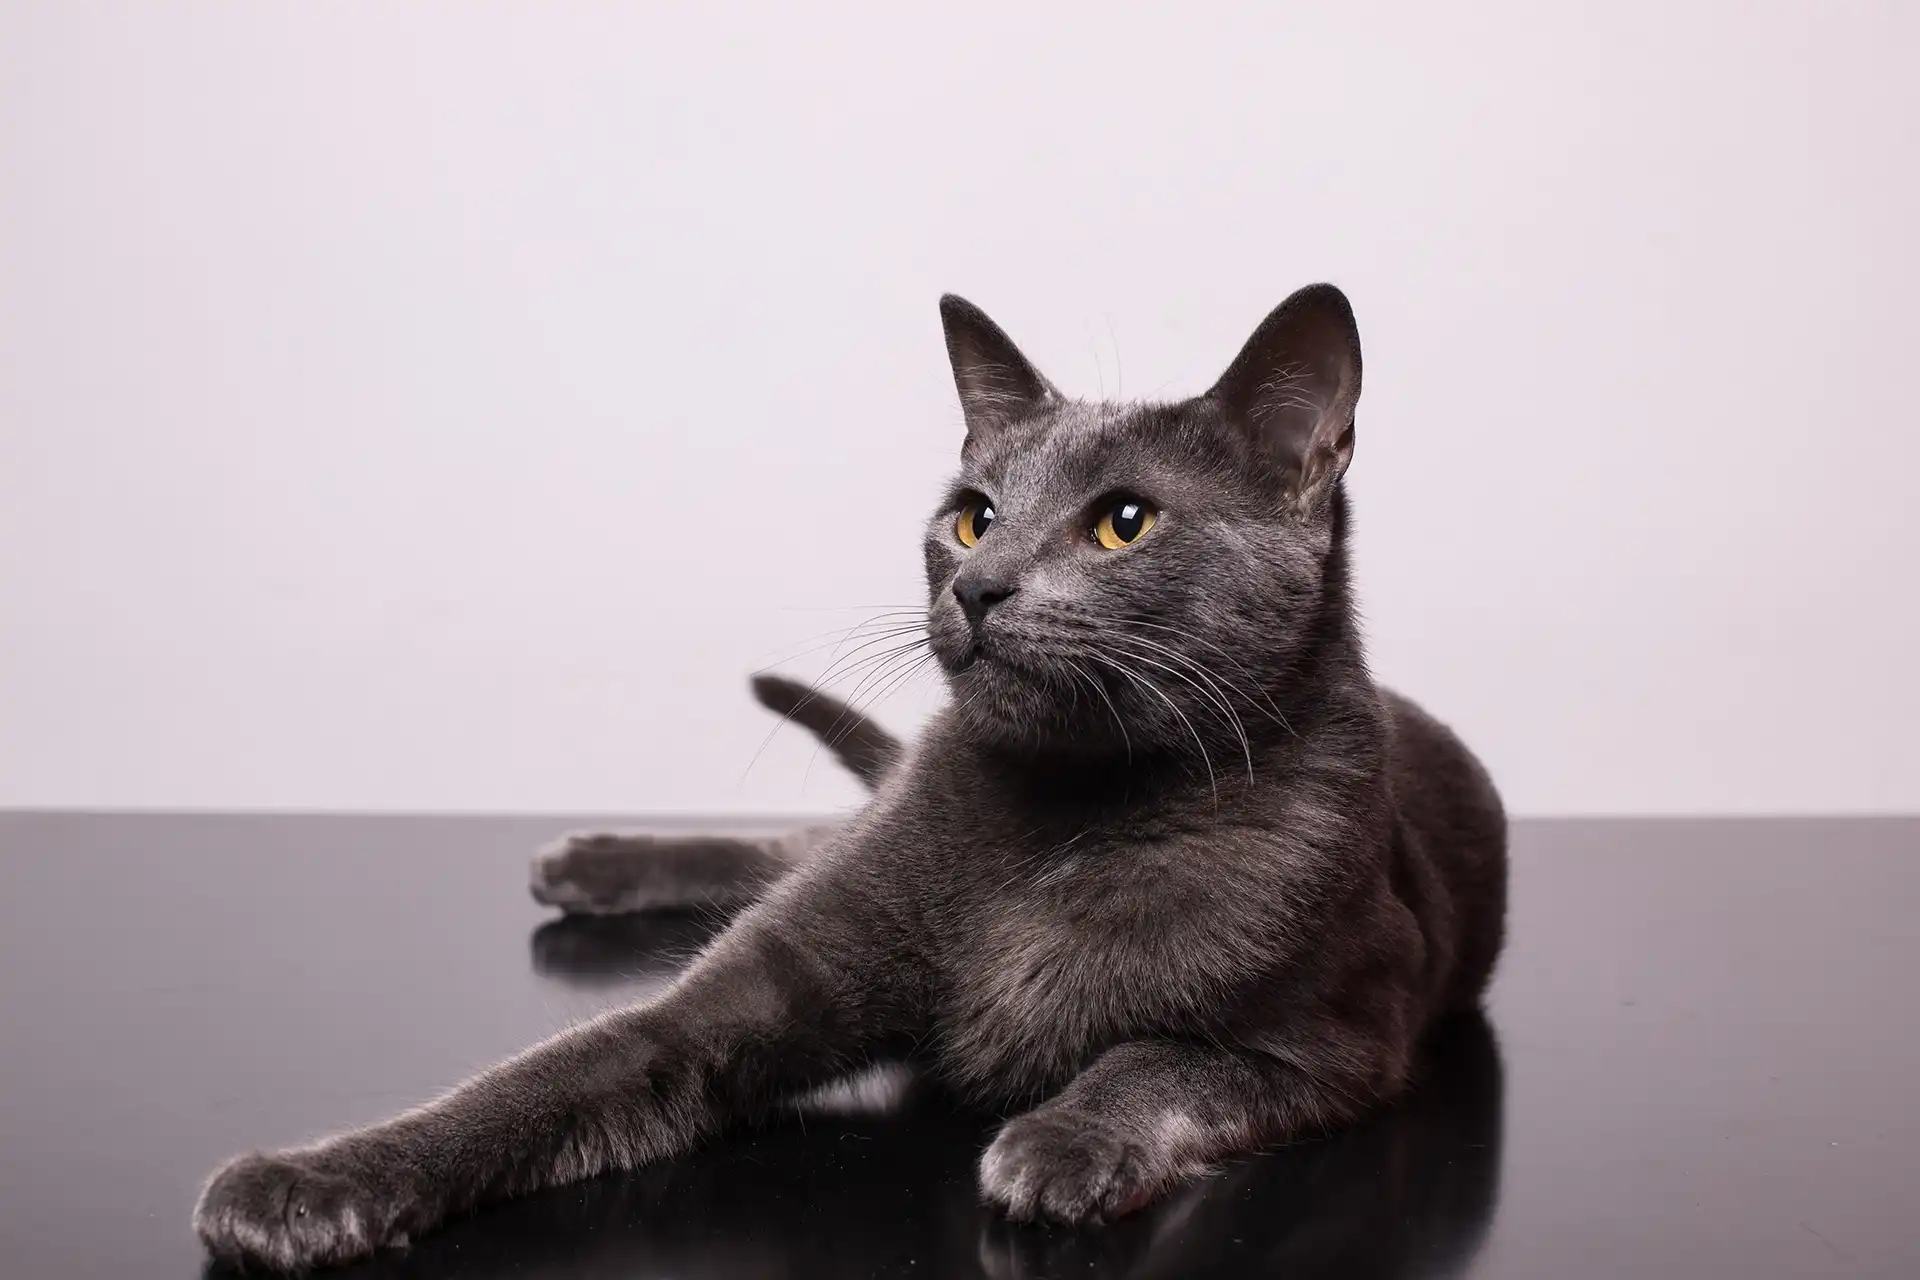 Dark grey cat with yellow eyes relaxing on the floor